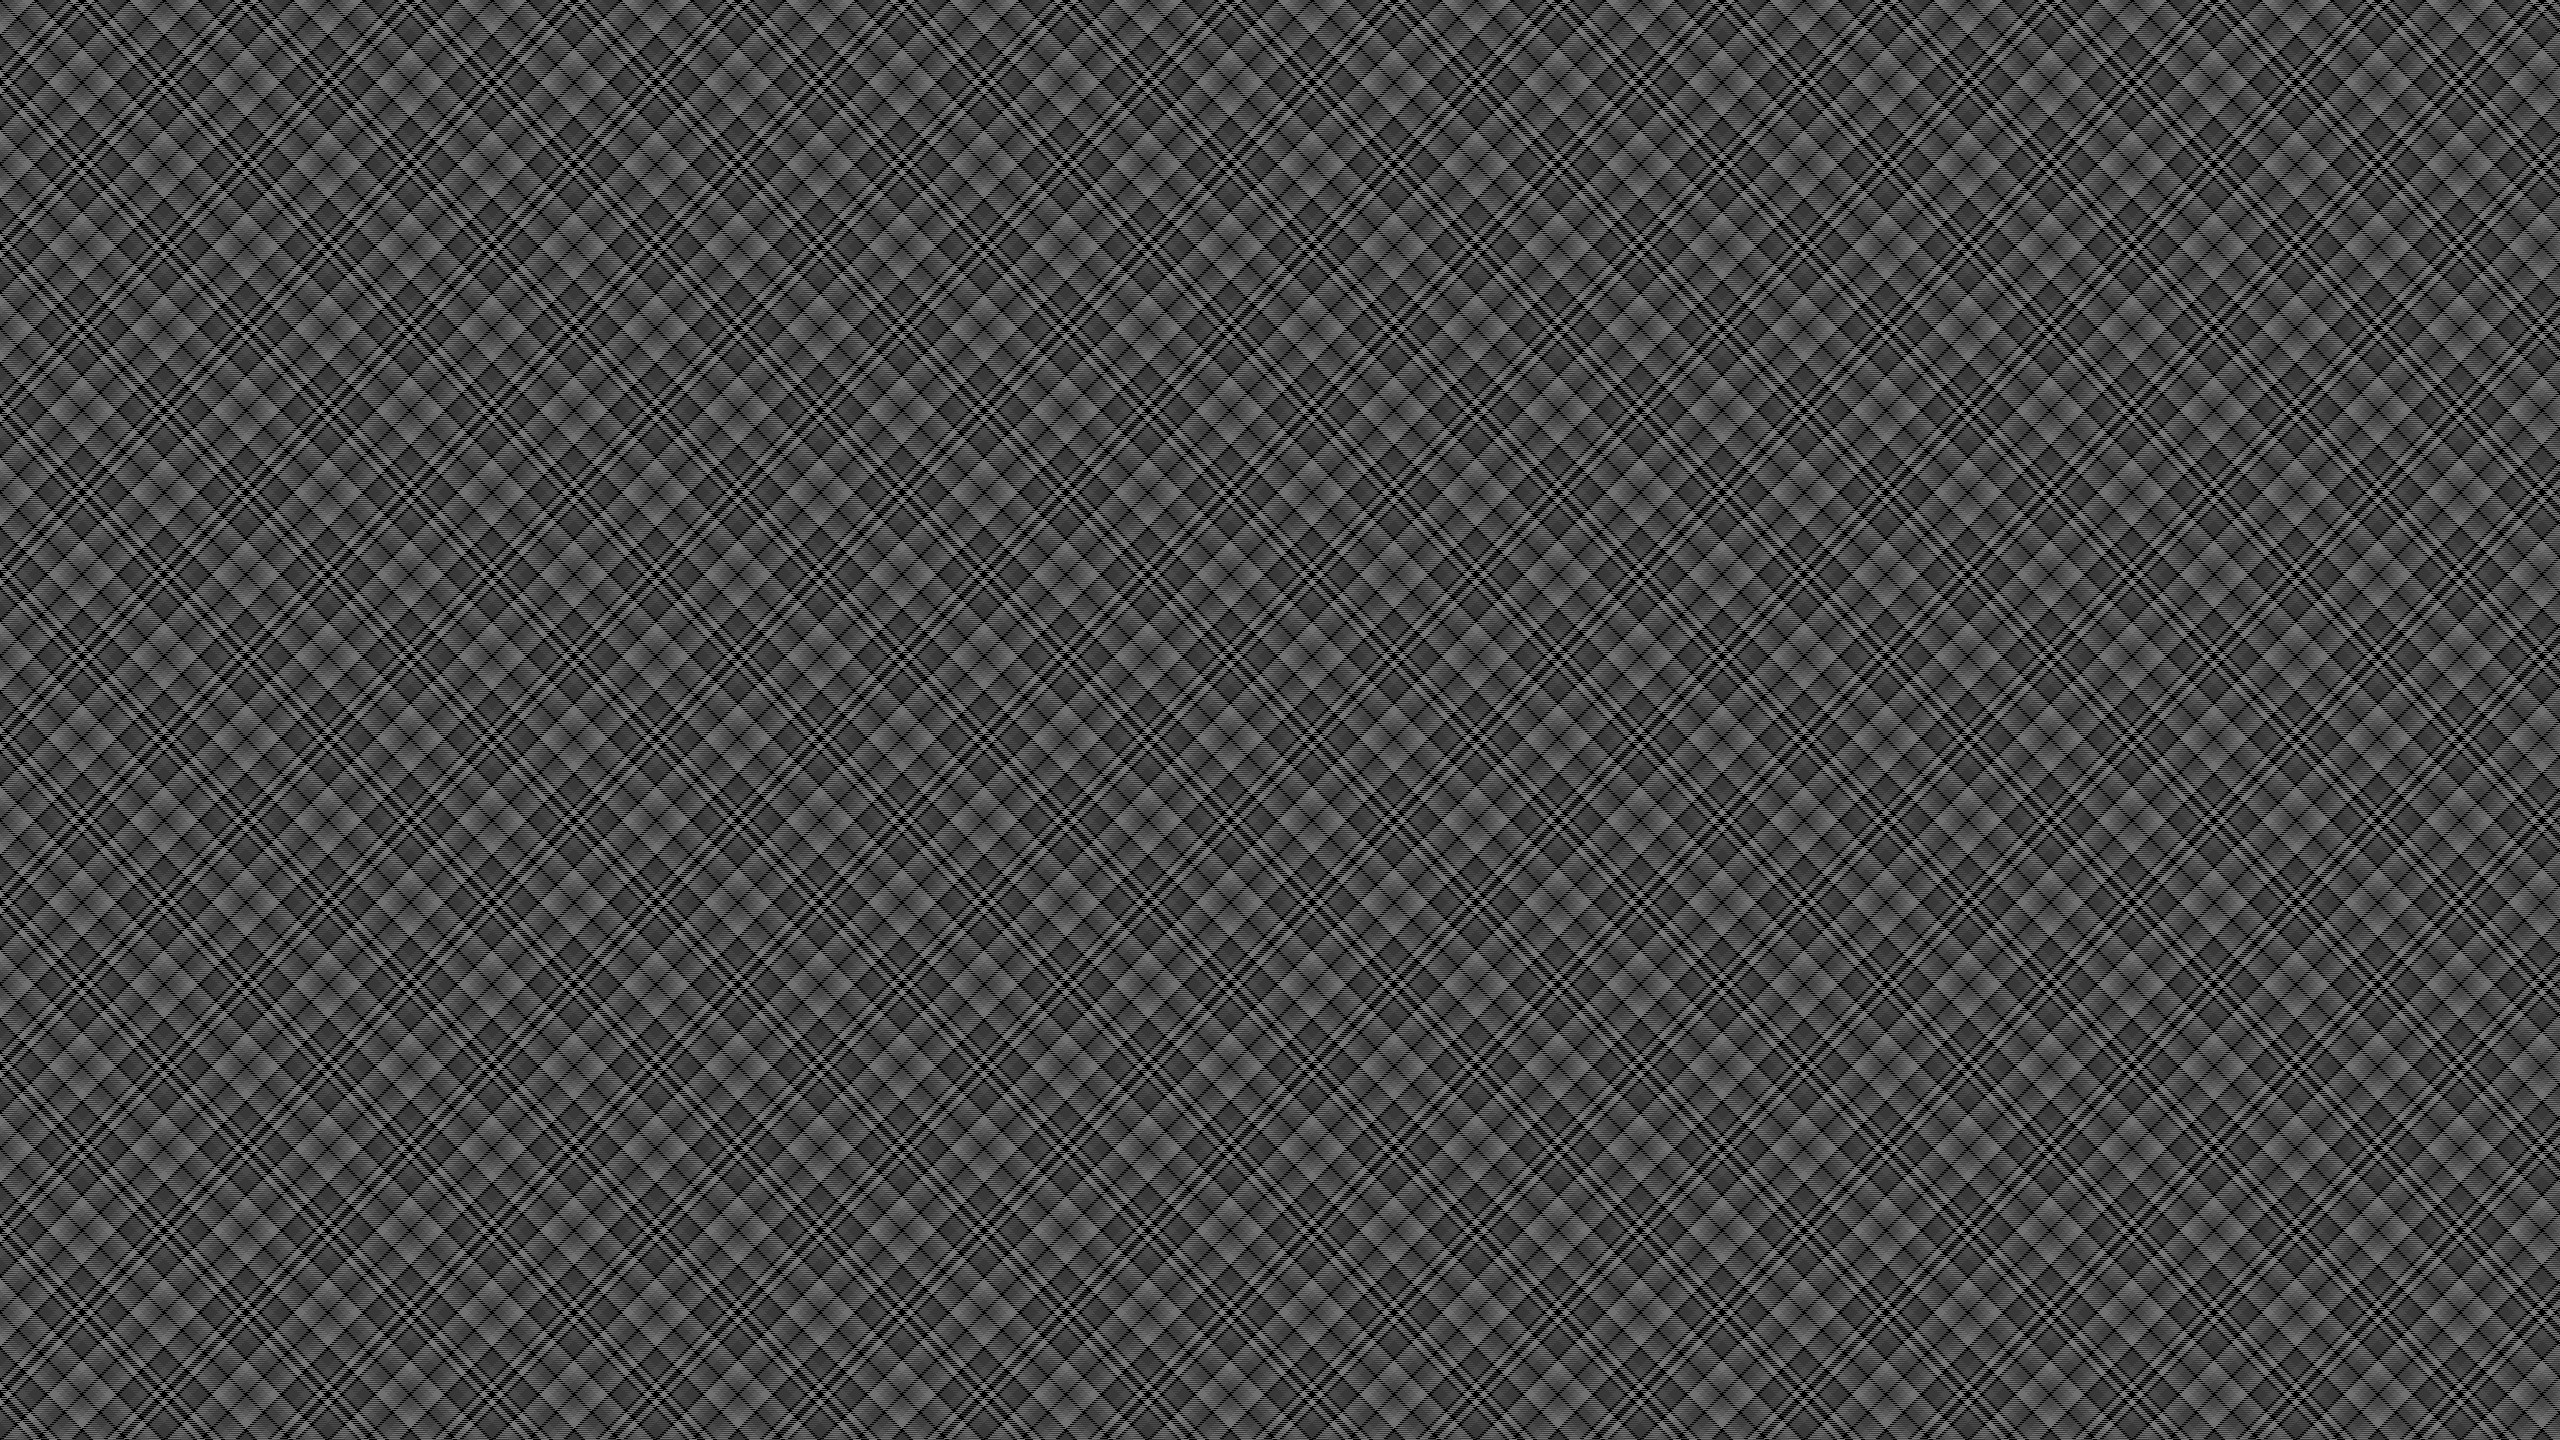 2560x1440 this Black Plaid Desktop Wallpaper is easy Just save the wallpaper 